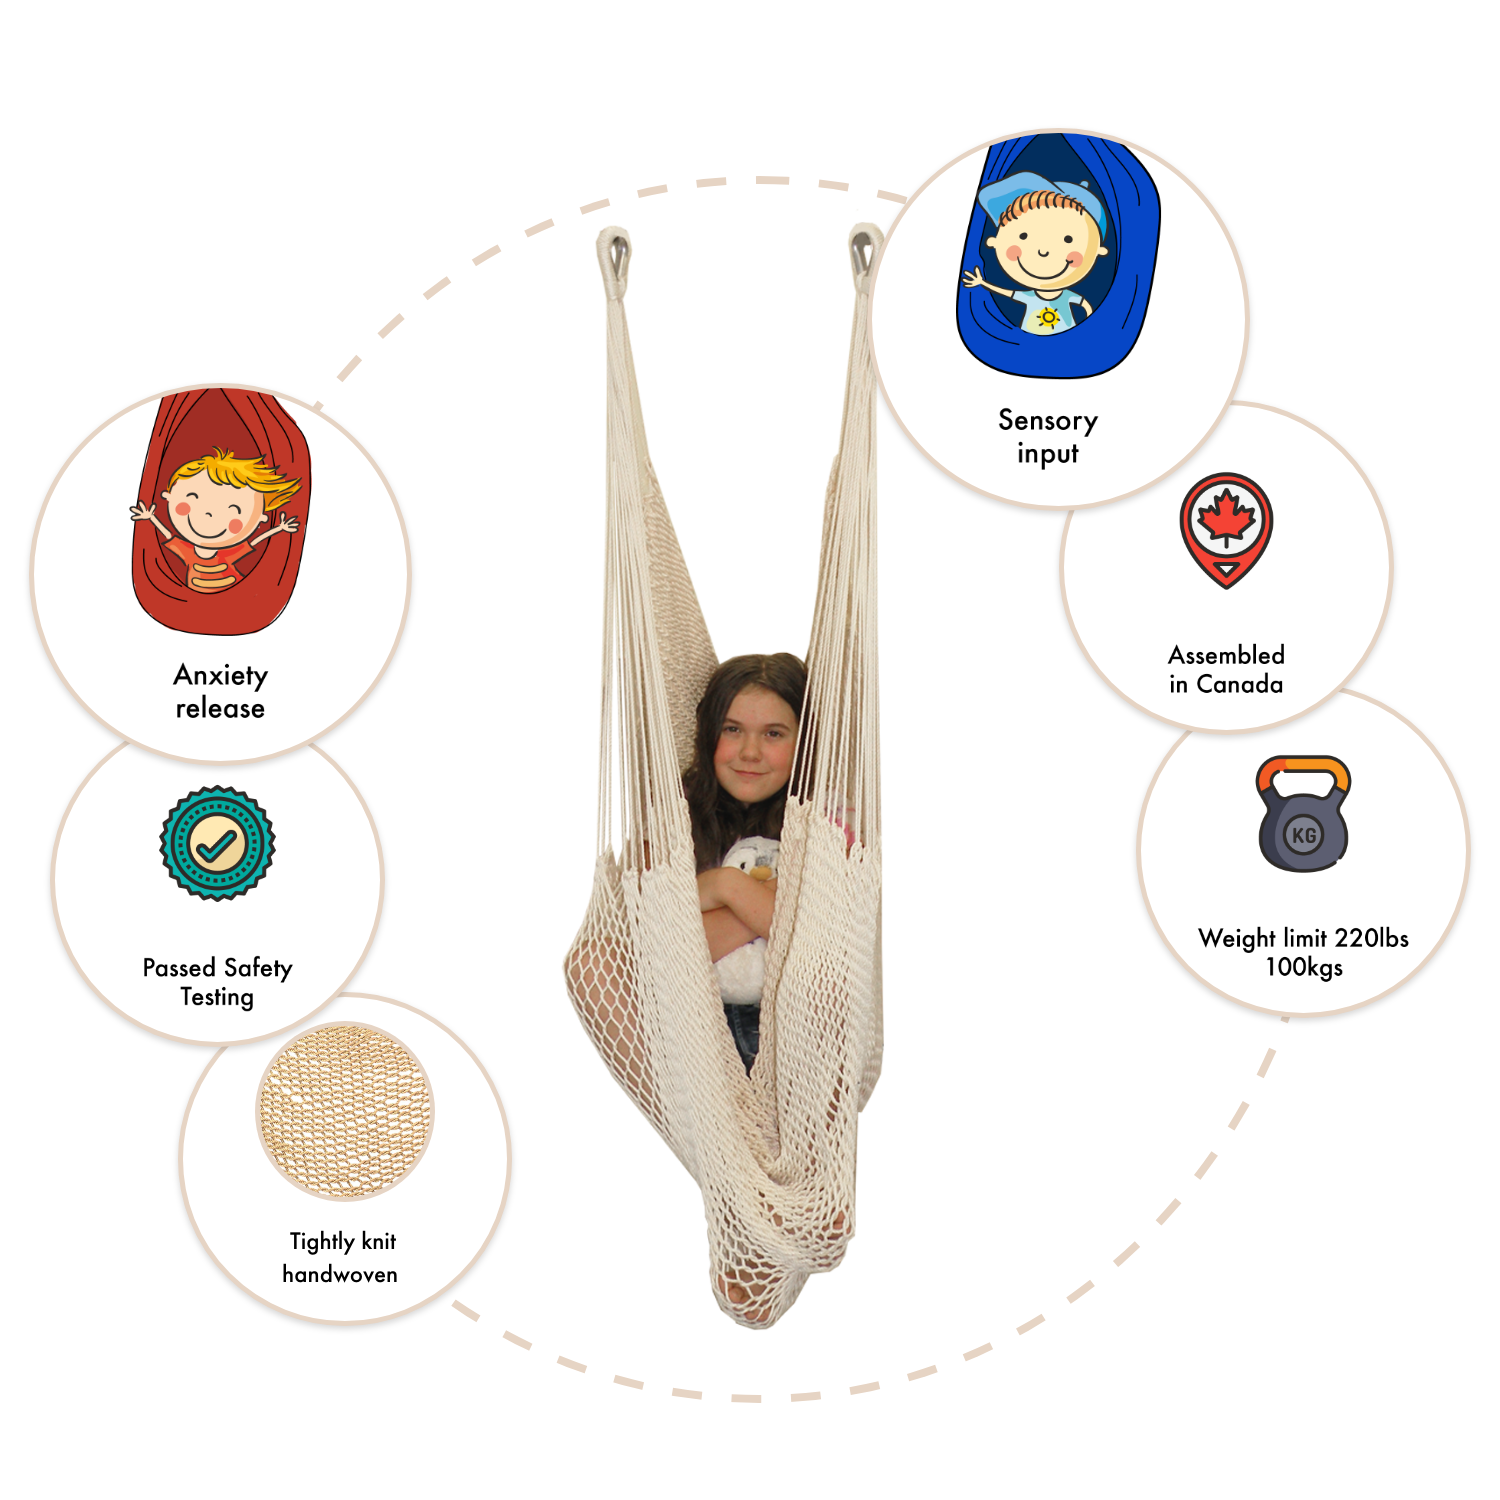 Infographics about Therapy Hammock Swing - Soft Ivory - A girl is sitting in a hammock with her toy with features and benefits listed around: Sensory input, anxiety release, passed safety testing, tightly knit handwoven, assembled in Canada, weight limit 220 lbs.